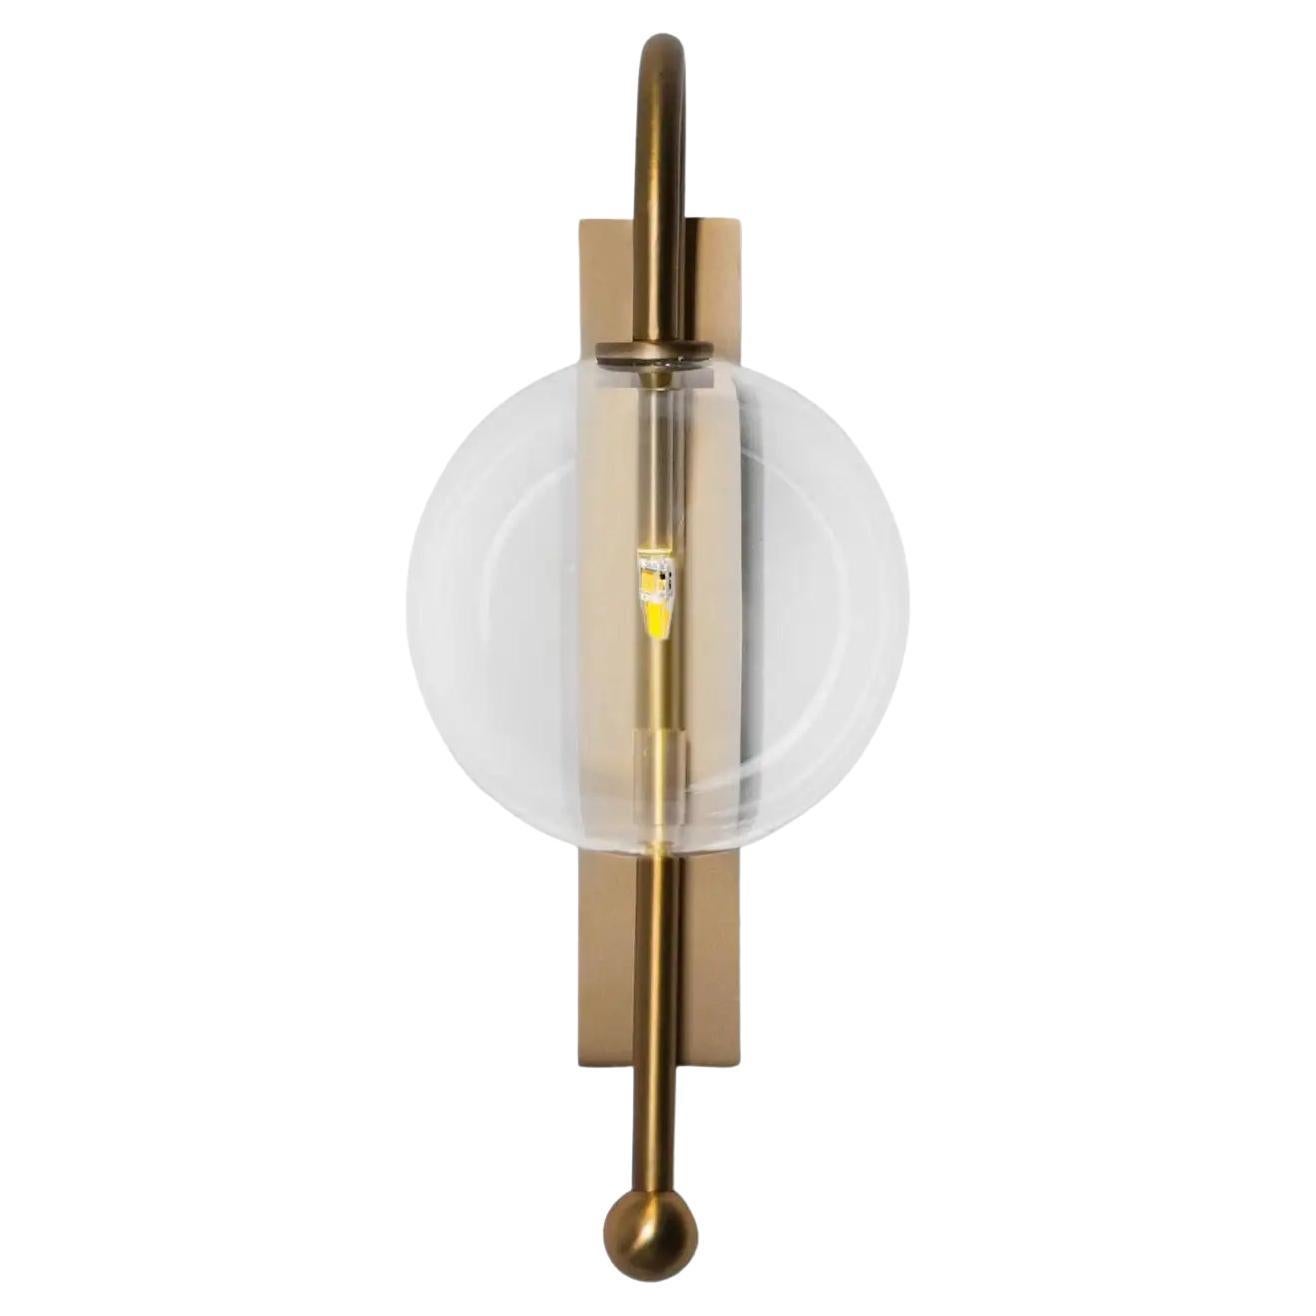 Naples Brass Wall Sconce by Schwung